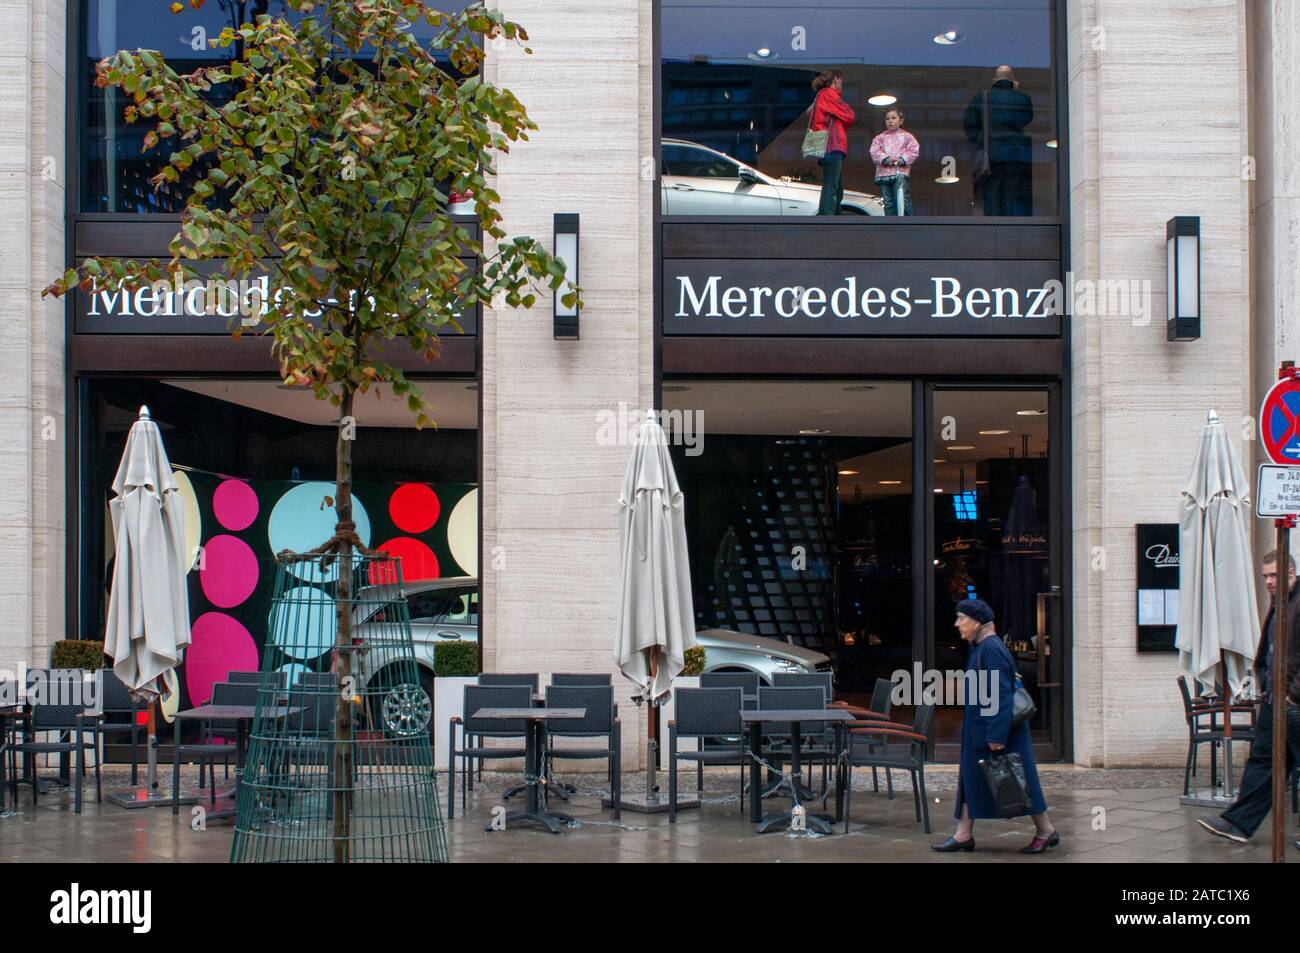 Berlin Mercedes Benz motor car showroom, Outlet selling luxury cars and 'Berlin moves' slogan in Unter den Linden in Berlin Germany Stock Photo